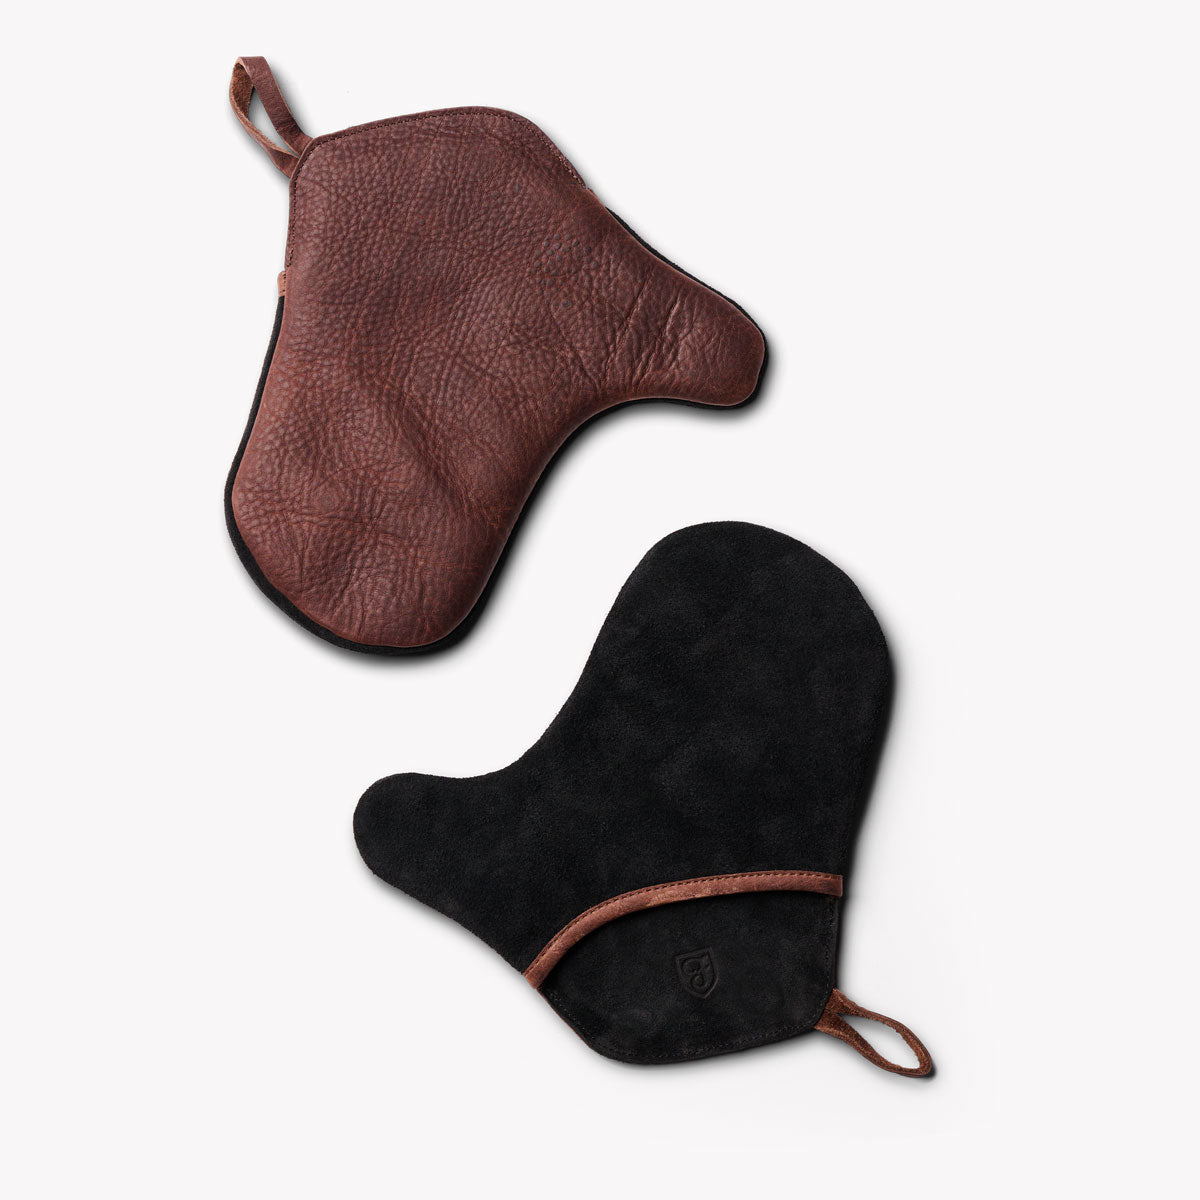 Leather Oven Mitts ᐈ Buy Leather Oven Mitts online